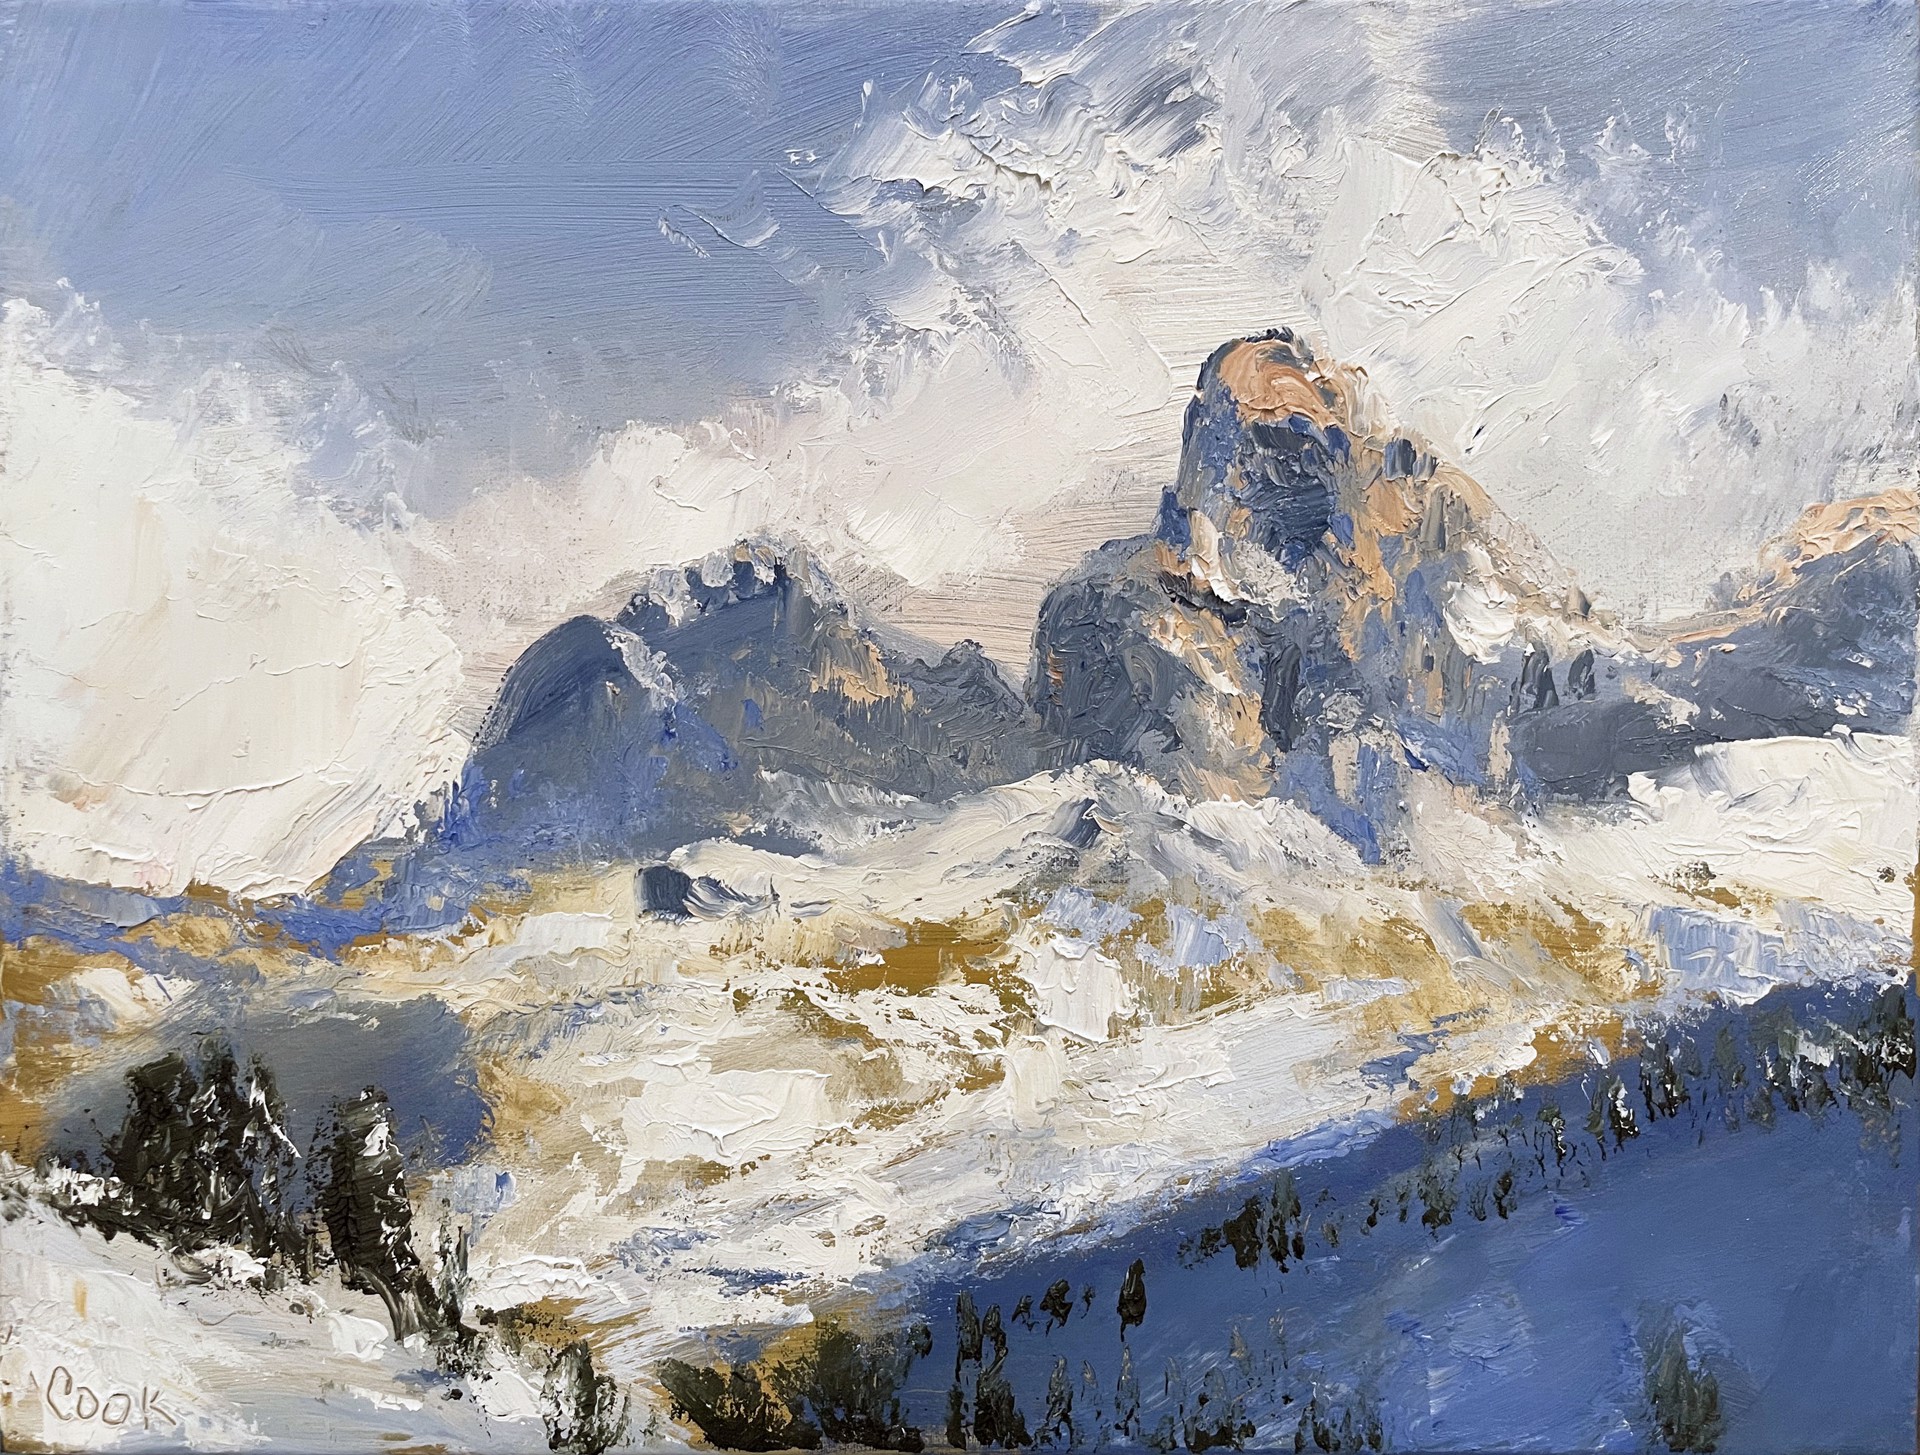 Teton Valley Study #3 by James Cook